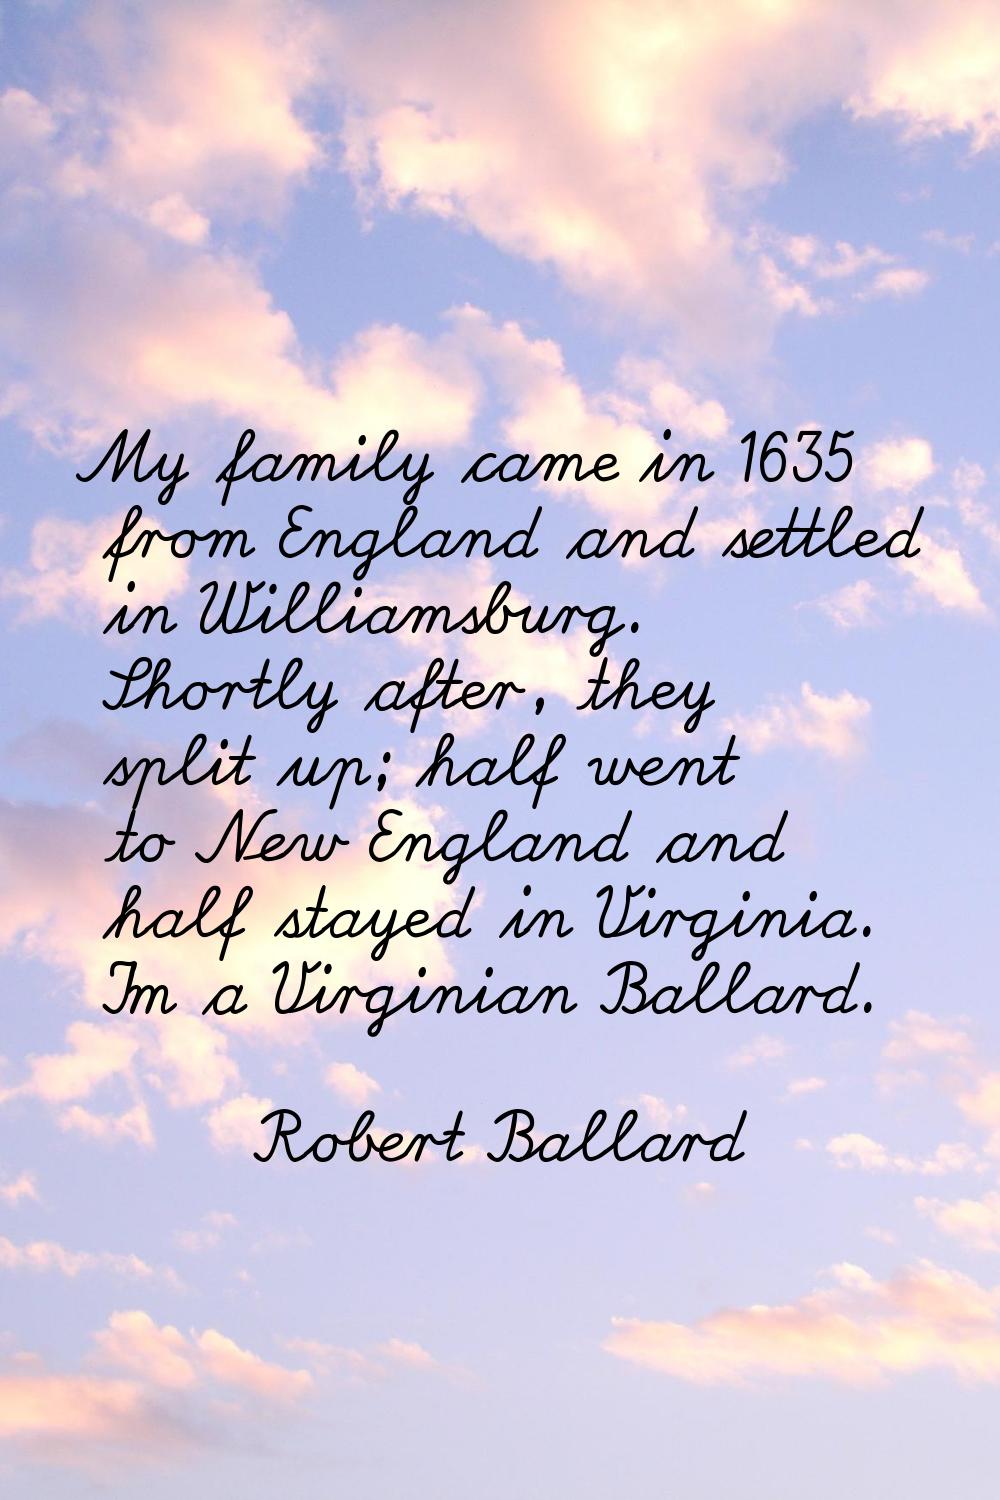 My family came in 1635 from England and settled in Williamsburg. Shortly after, they split up; half